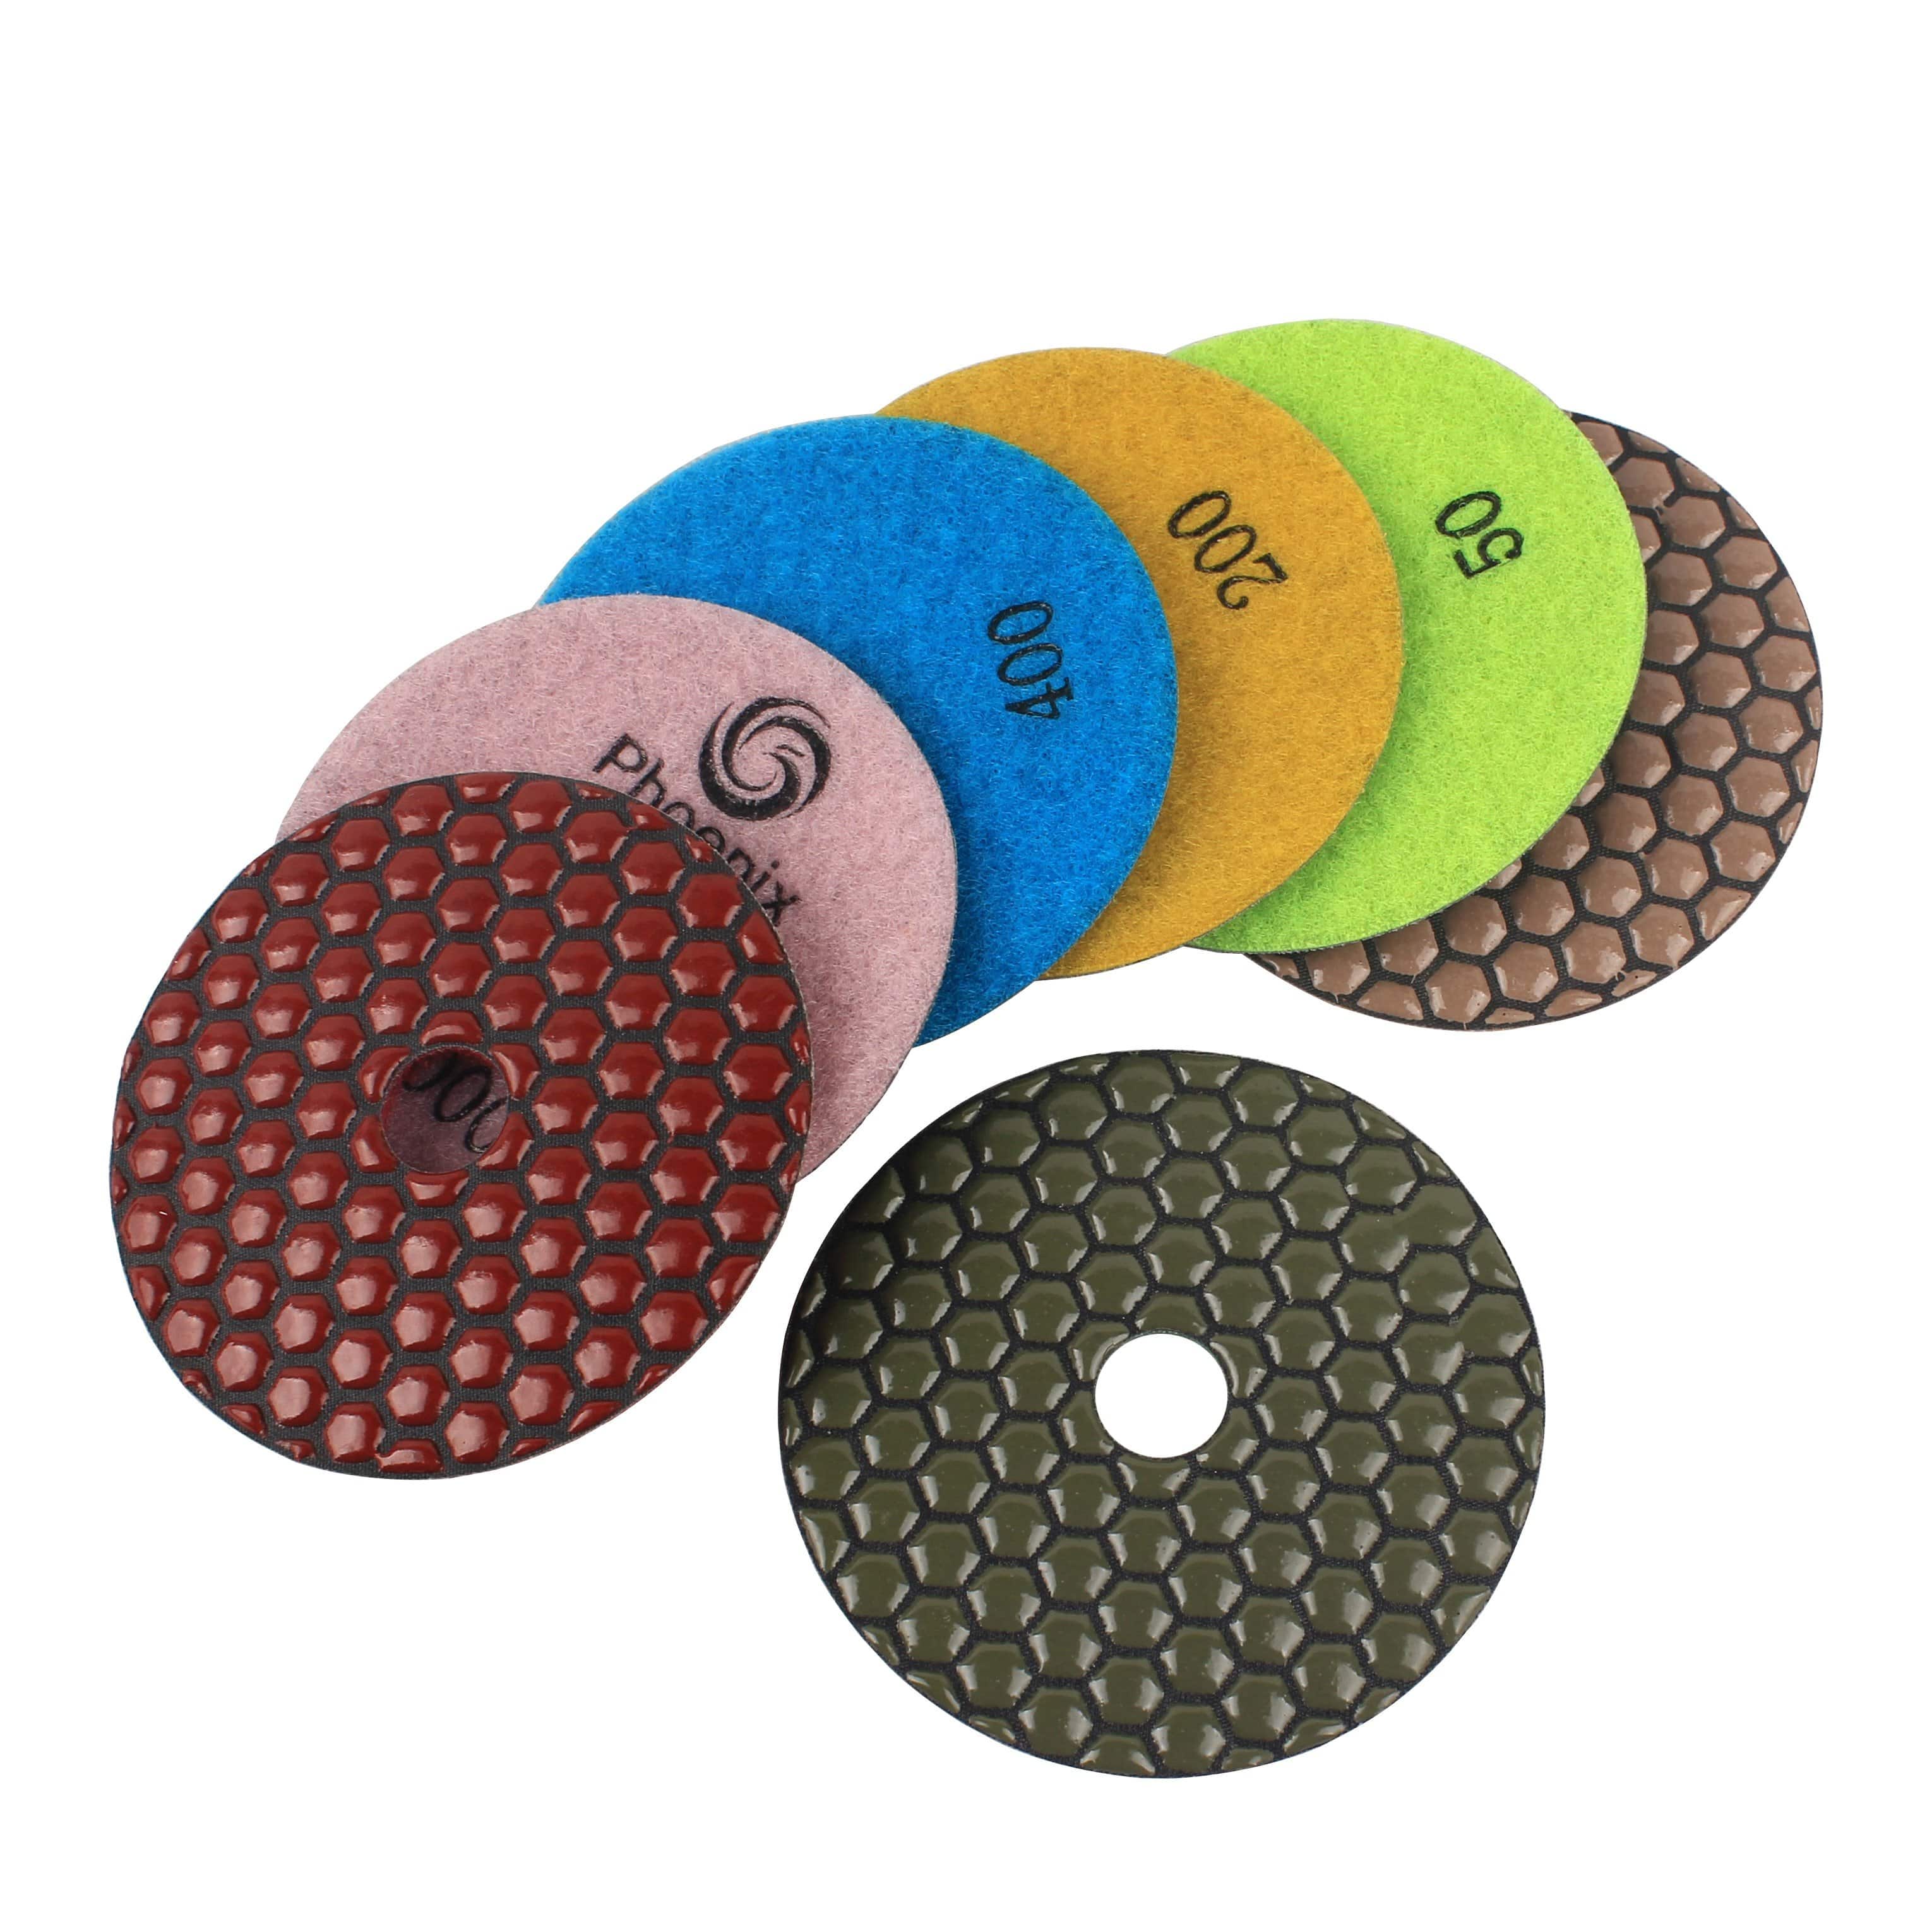 dry-polishing-pads-for-marble